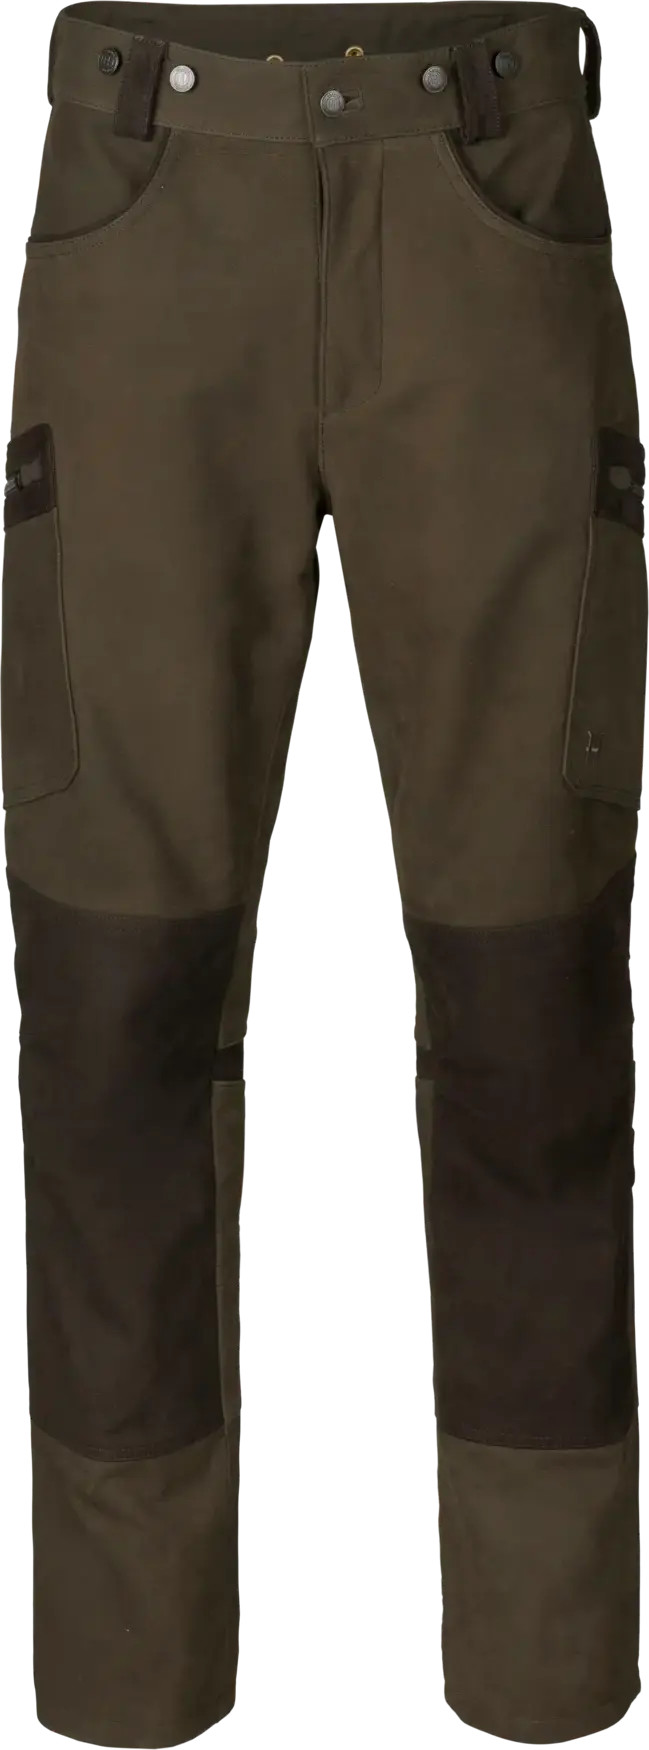 Mountain Hunter Pro trouser by Härkila | 3-layer GORE-TEX hunting pants